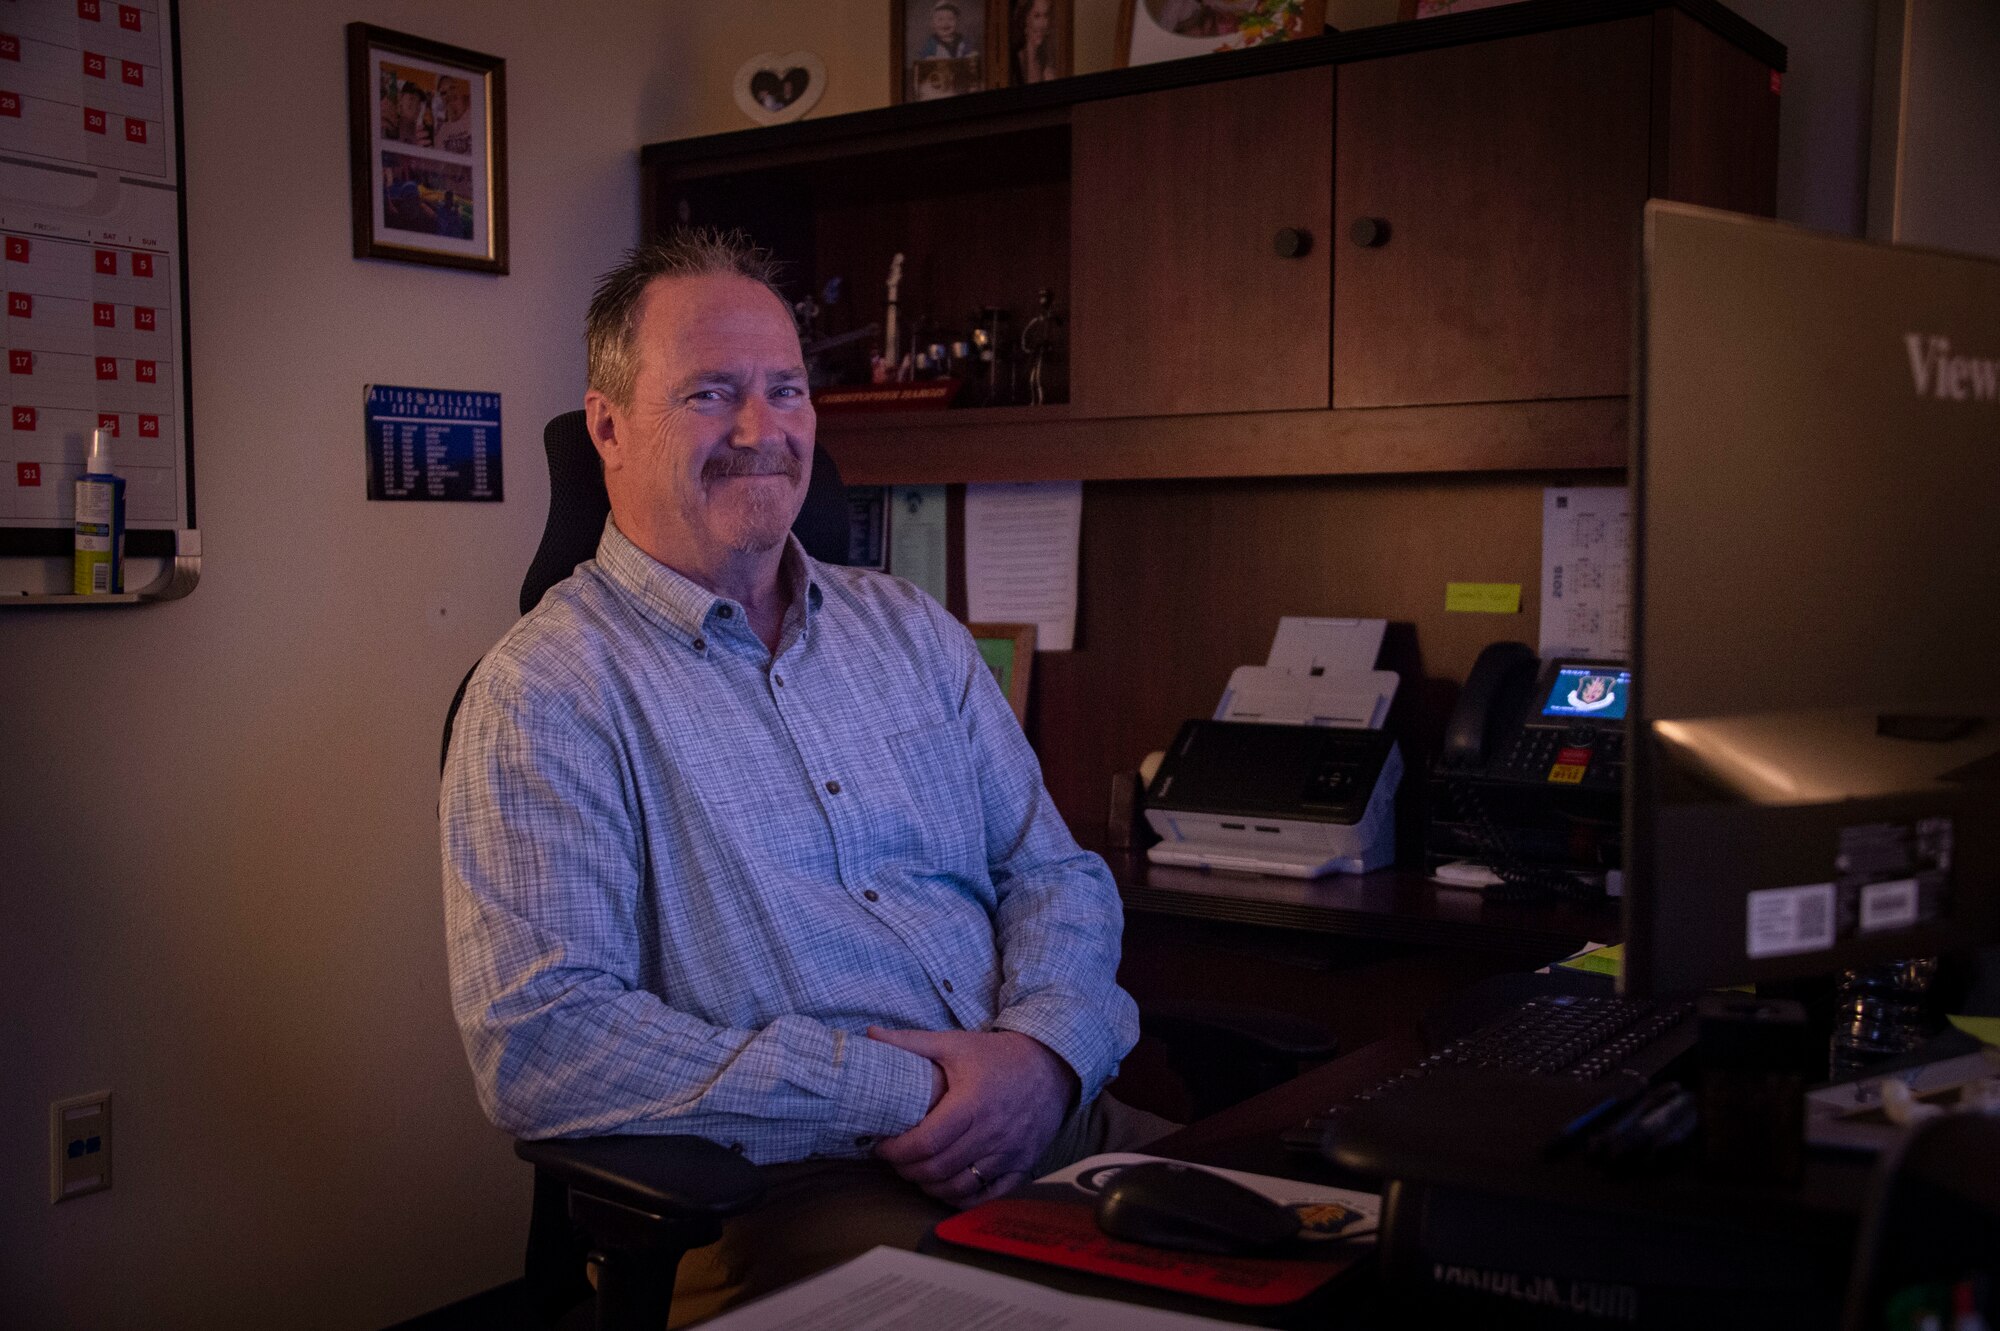 Chris Hargis, the community support coordinator assigned to the 97th Air Mobility Wing, sits at his desk